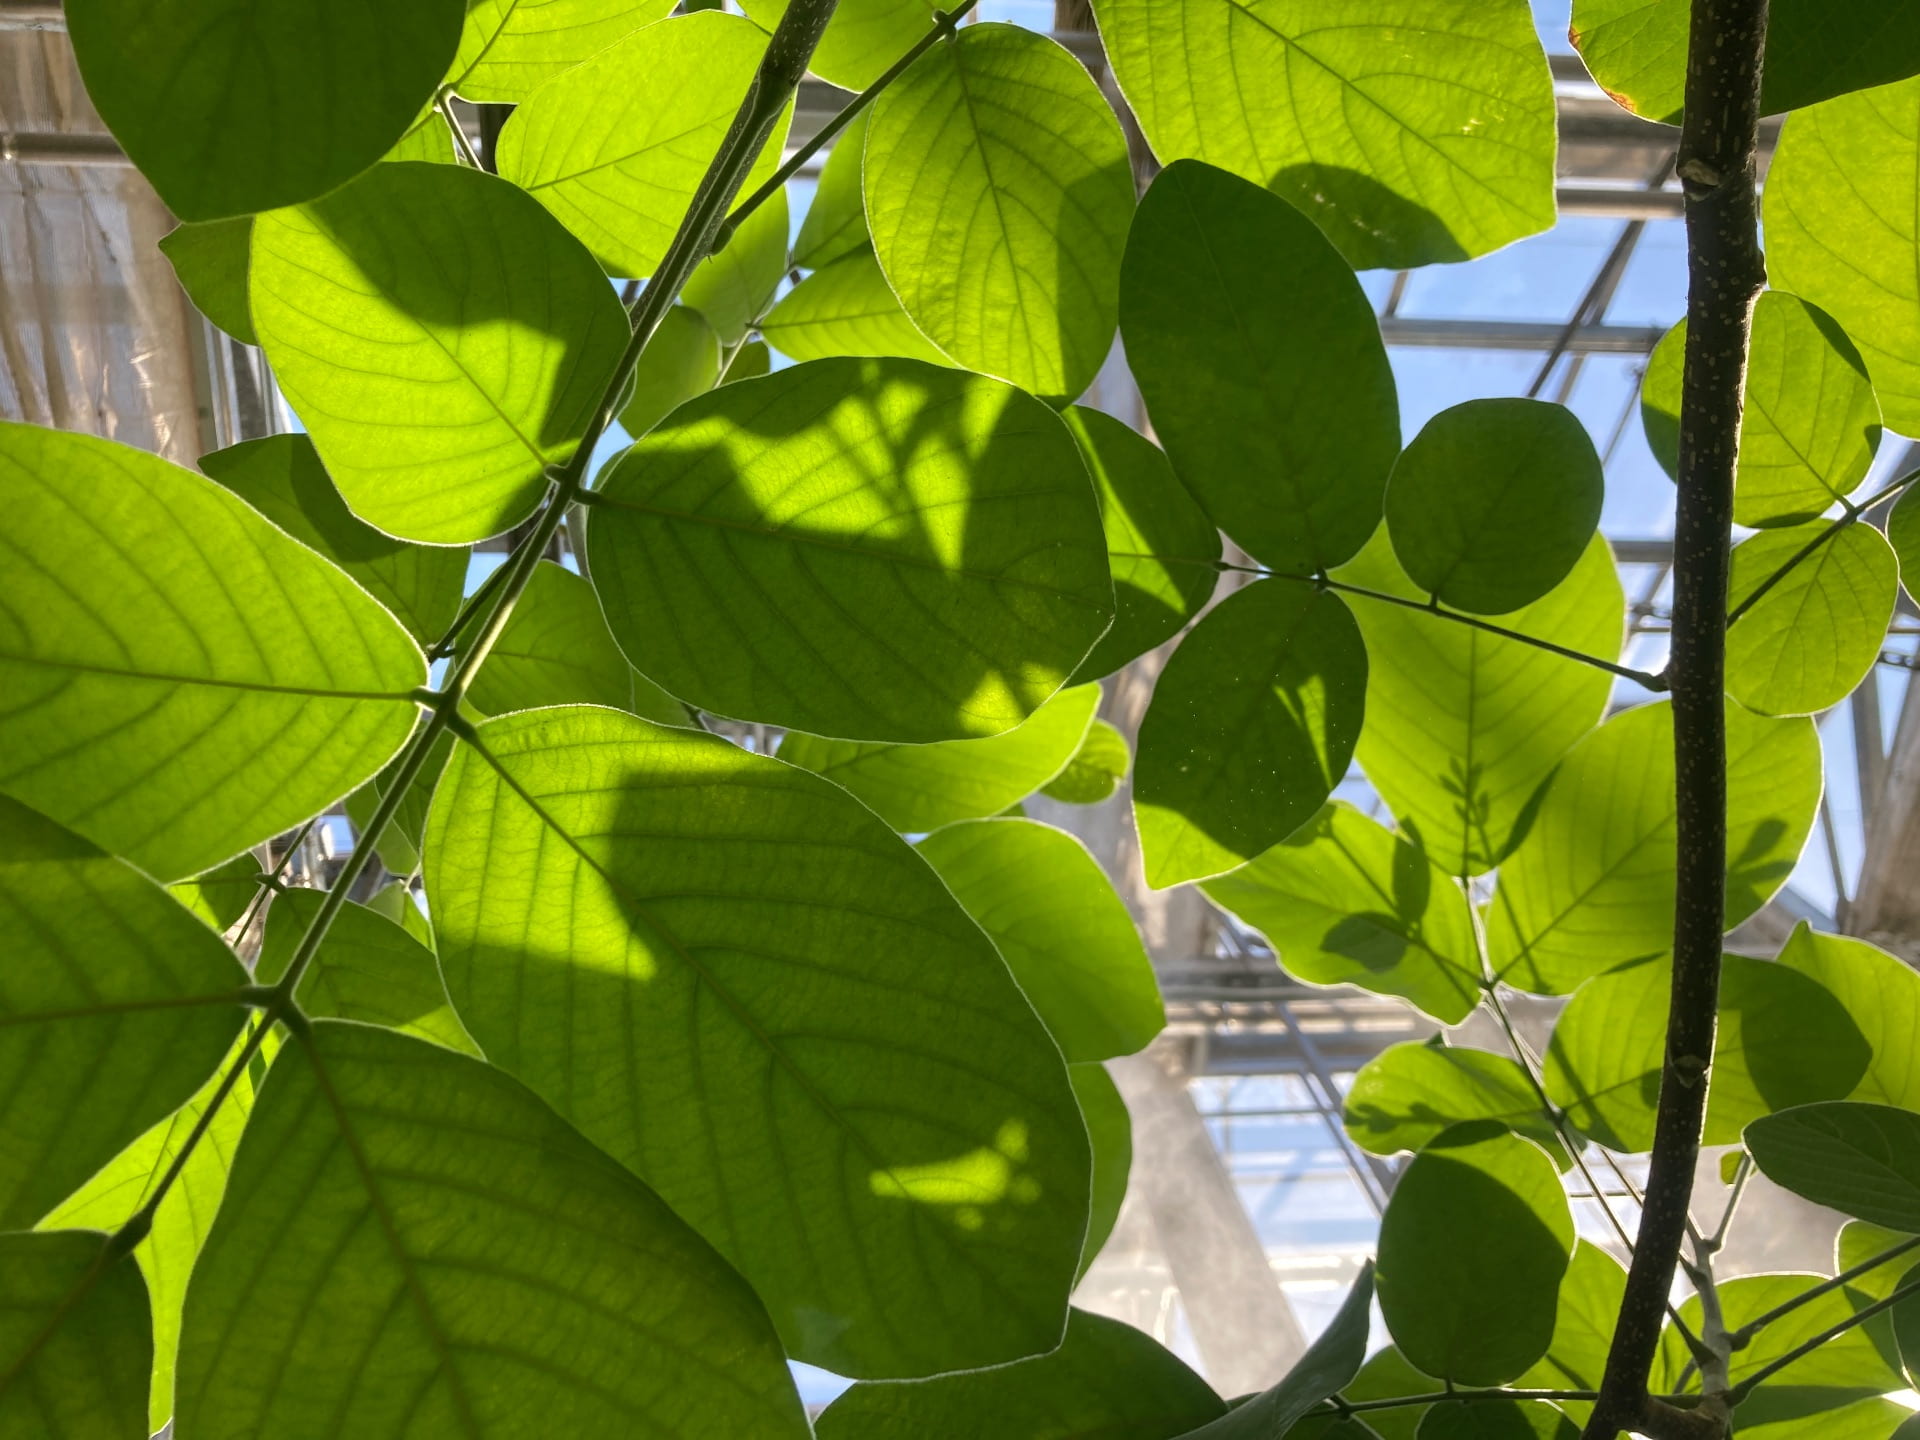 The Felipei lancepod, Lonchocarpus felipei was described by Biology Faculty Daniel Janzen and is currently growing in the Biology Greenhouse's teaching collection.